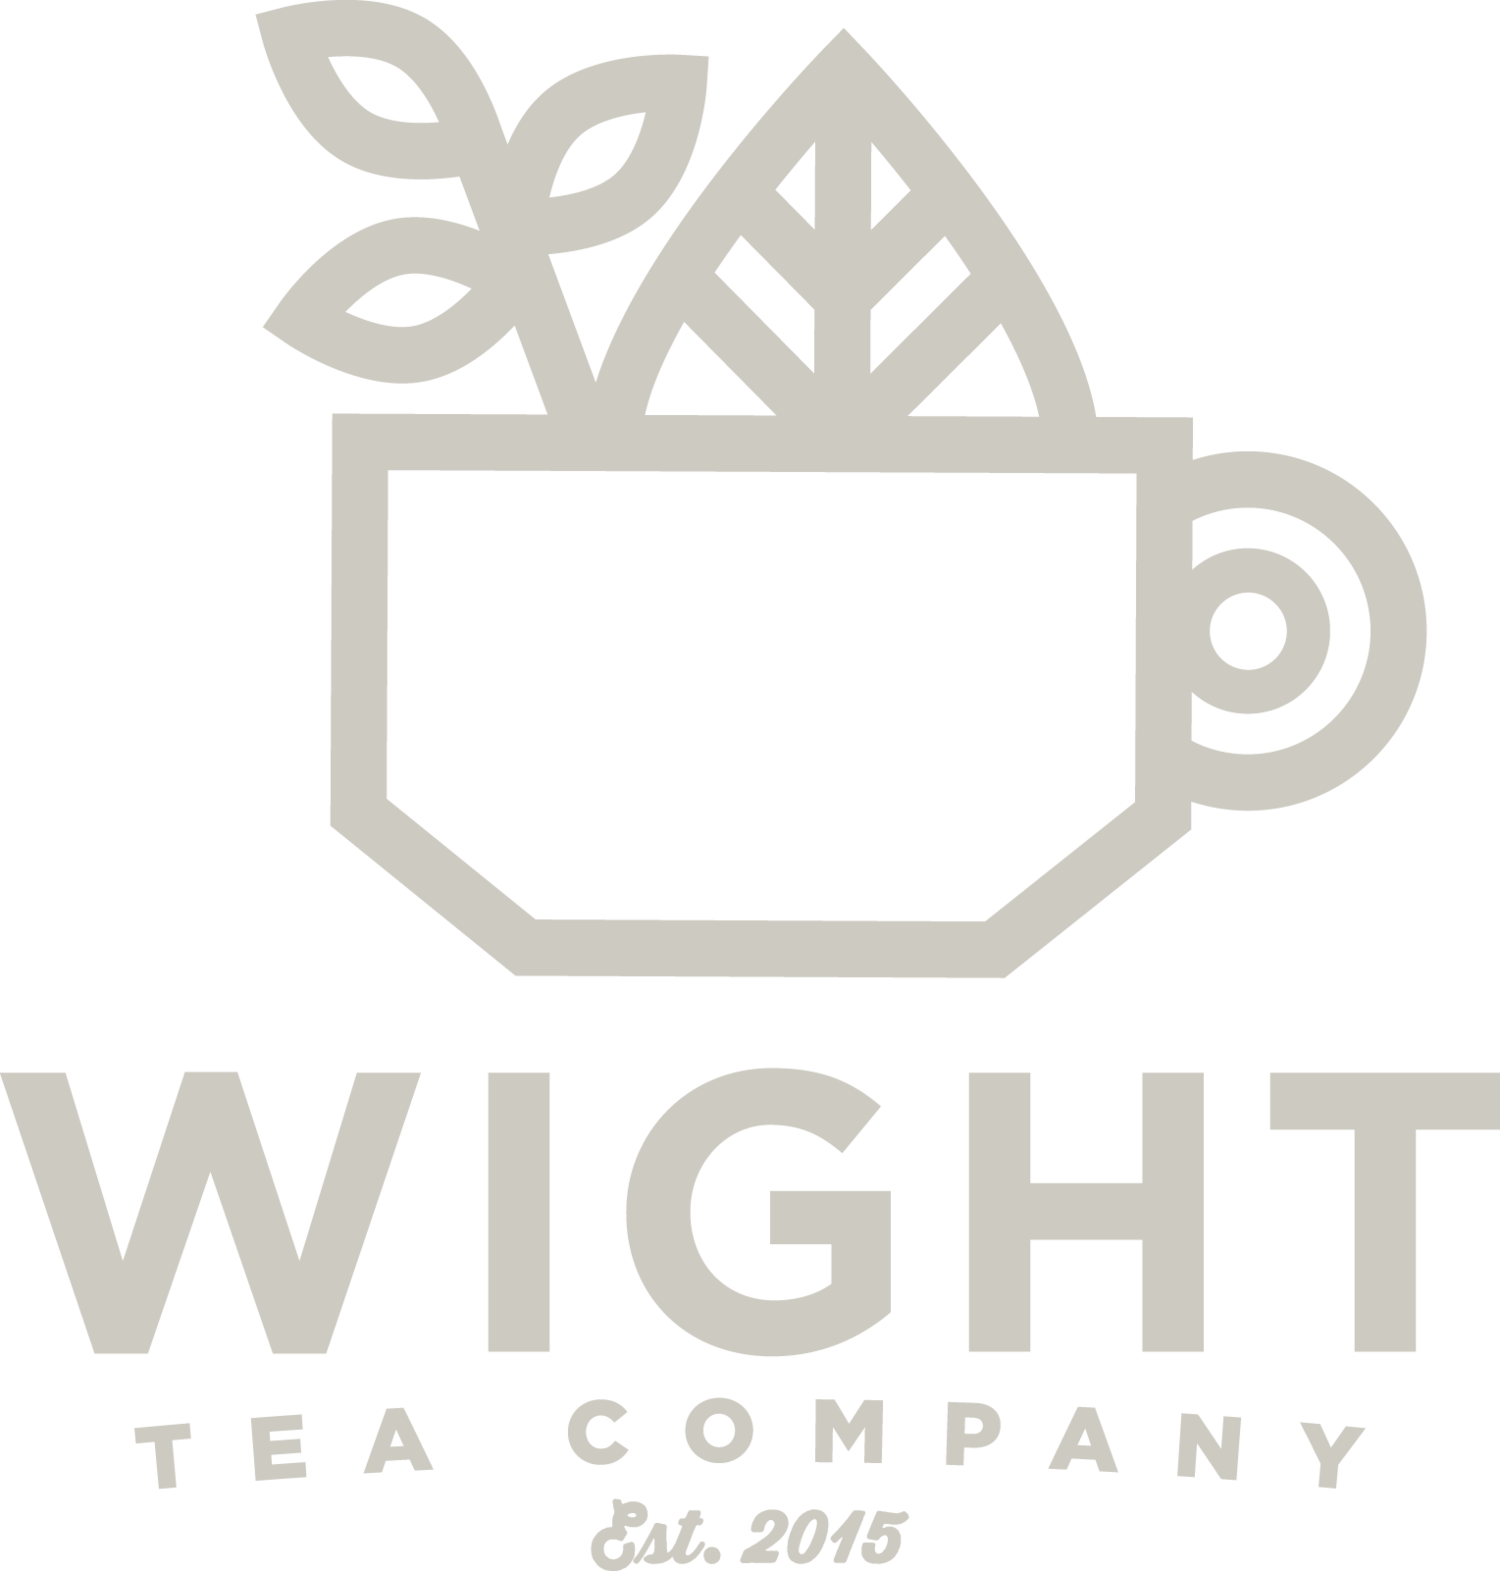 Black and Wight Logo - Wight Tea Co